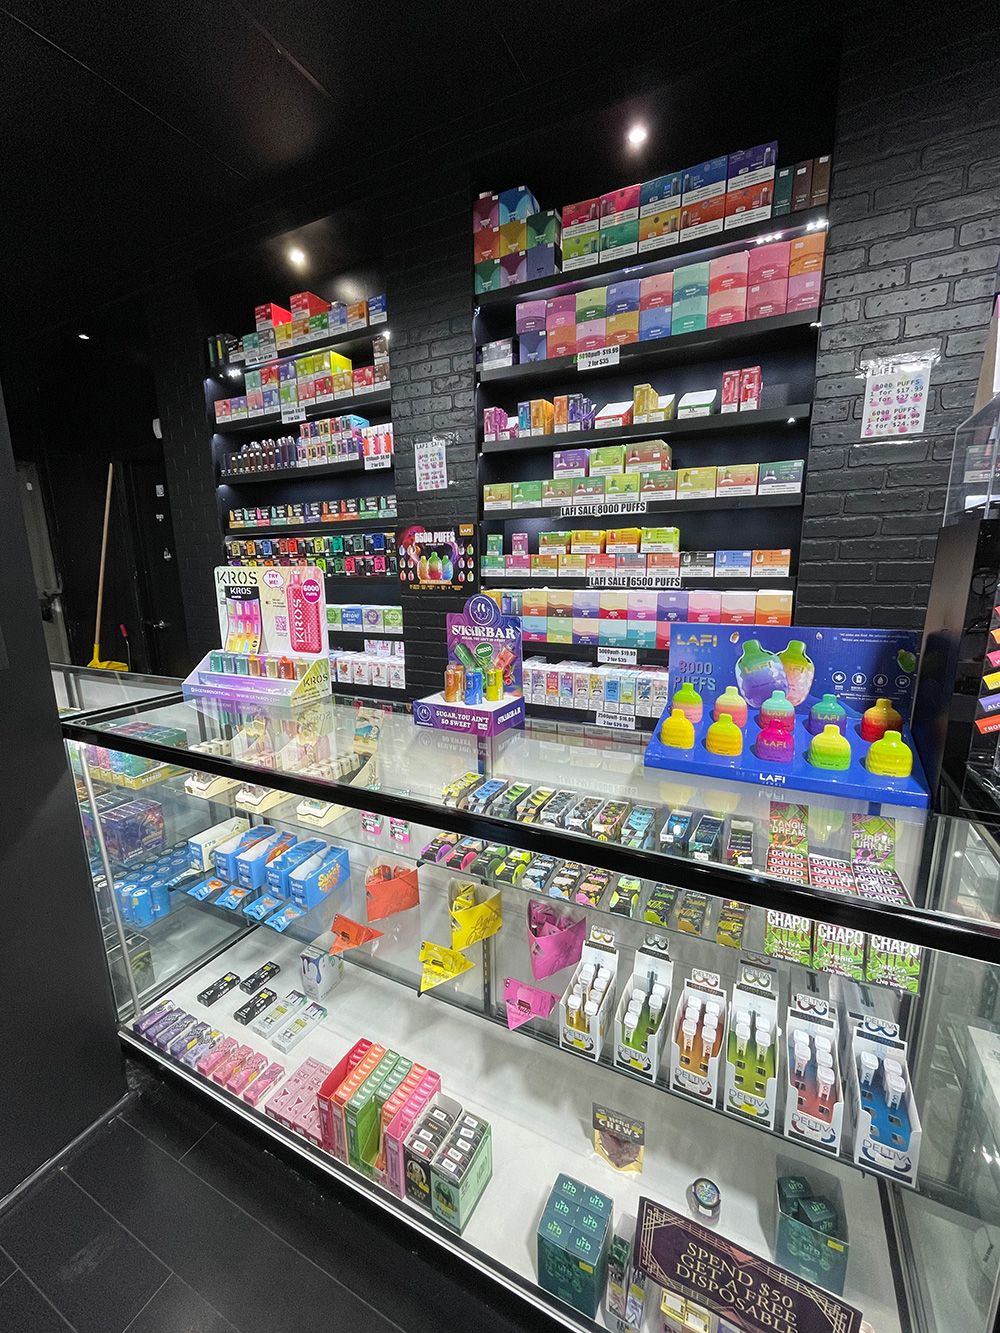 Vape Shops Electronic Cigarettes in Houston on YP.com. See reviews, photos, directions, phone numbers and more for the best Vape Shops Reviews and store details of H TOWN SMOKE & VAPE SHOP - a vape shop in Houston, Texas. Get vape store hours, directions, more.